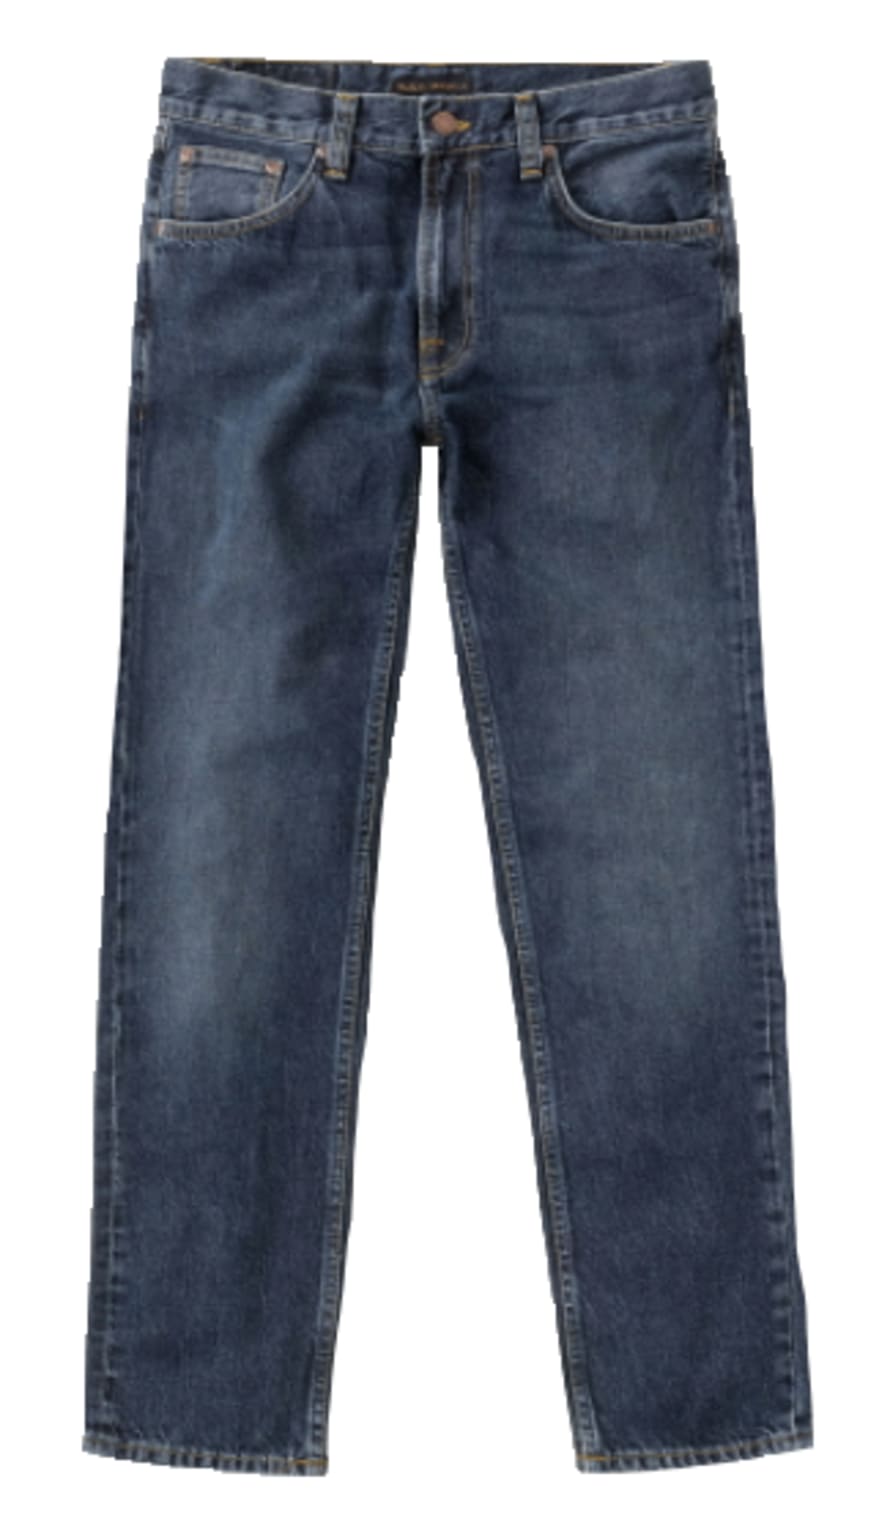 Nudie Jeans Gritty Jackson Regular Fit Jeans (Blue Slate)